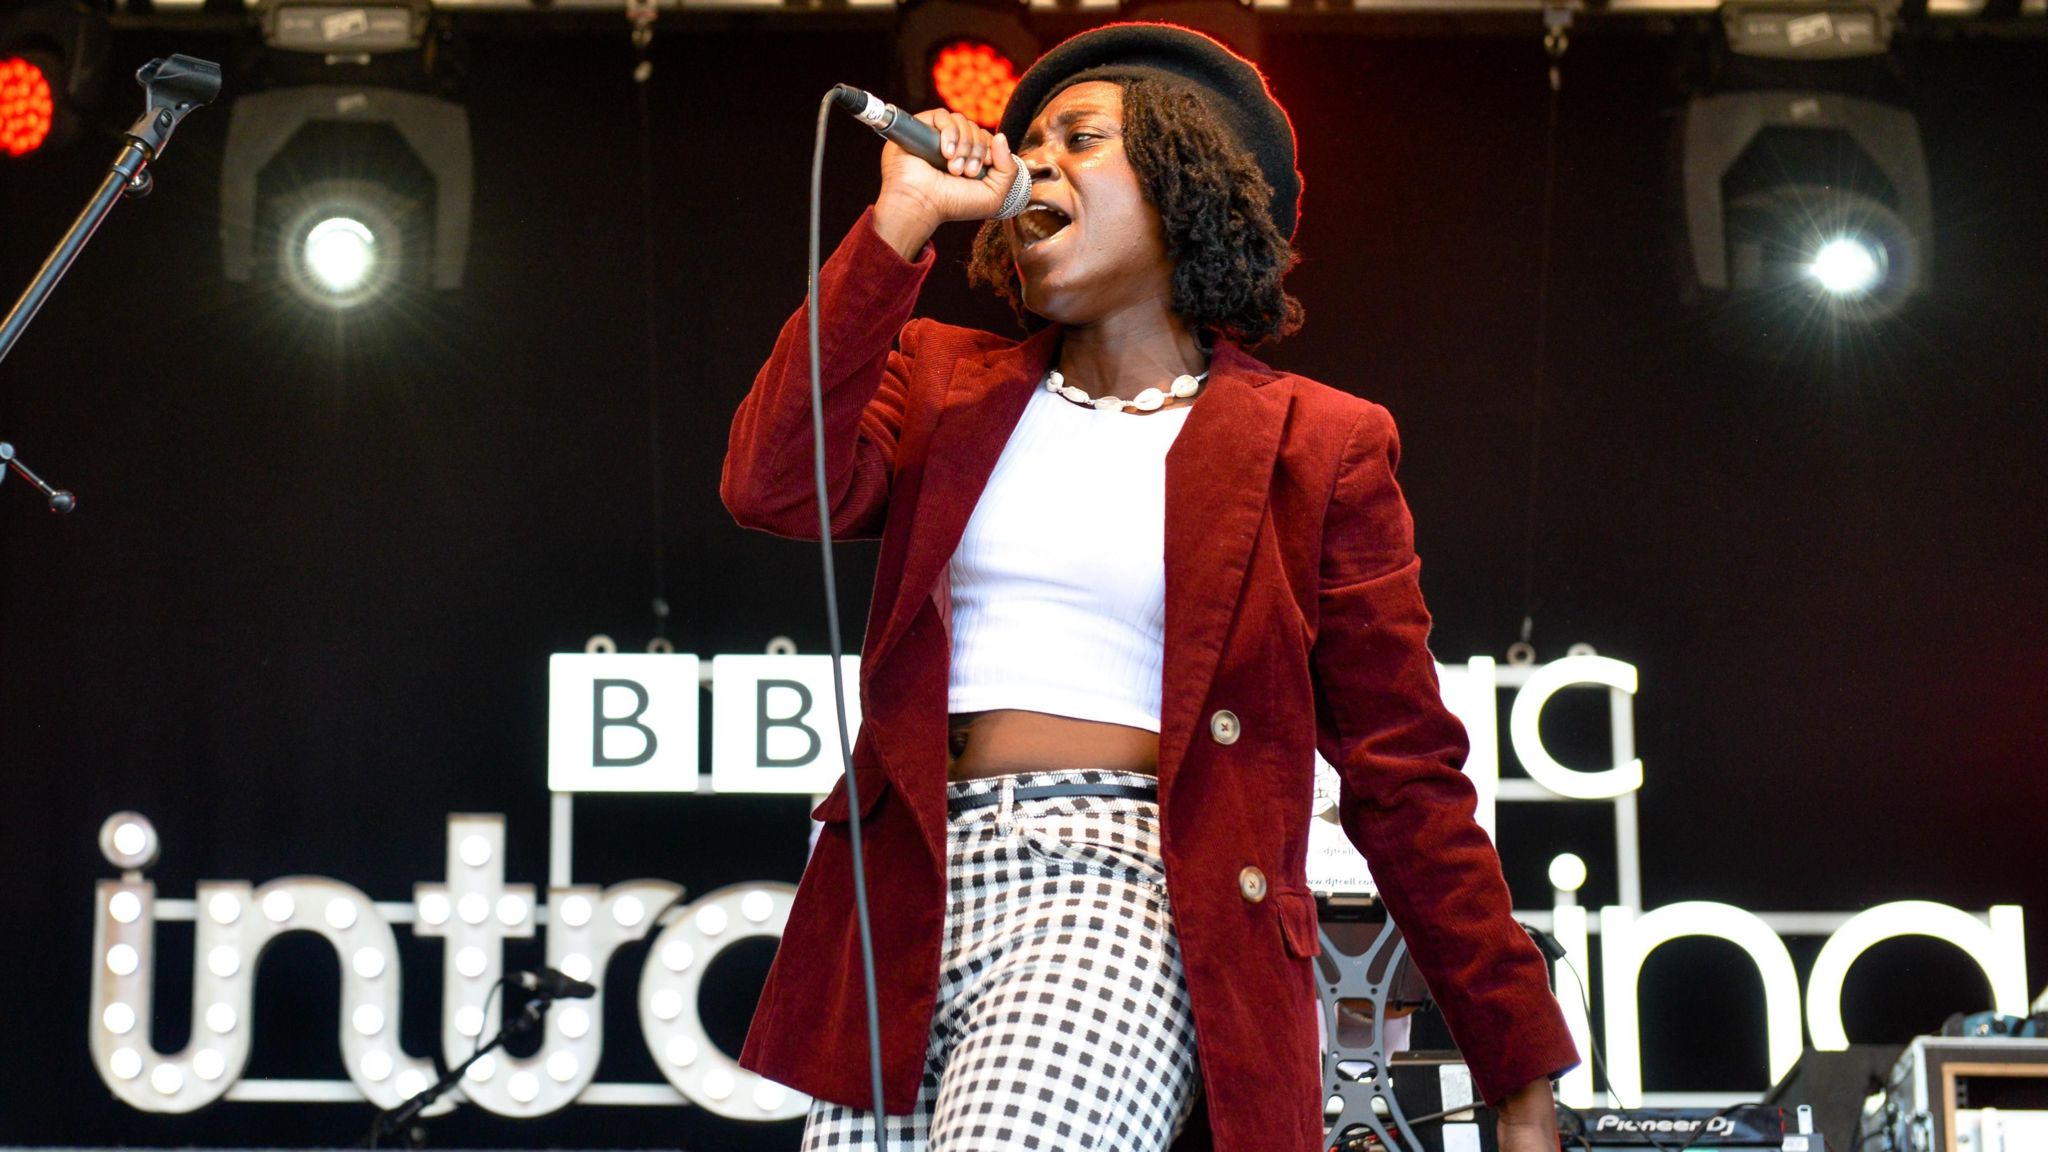 Lavz performing on stage at Reading festival with a read coat and black and white patterned trousers